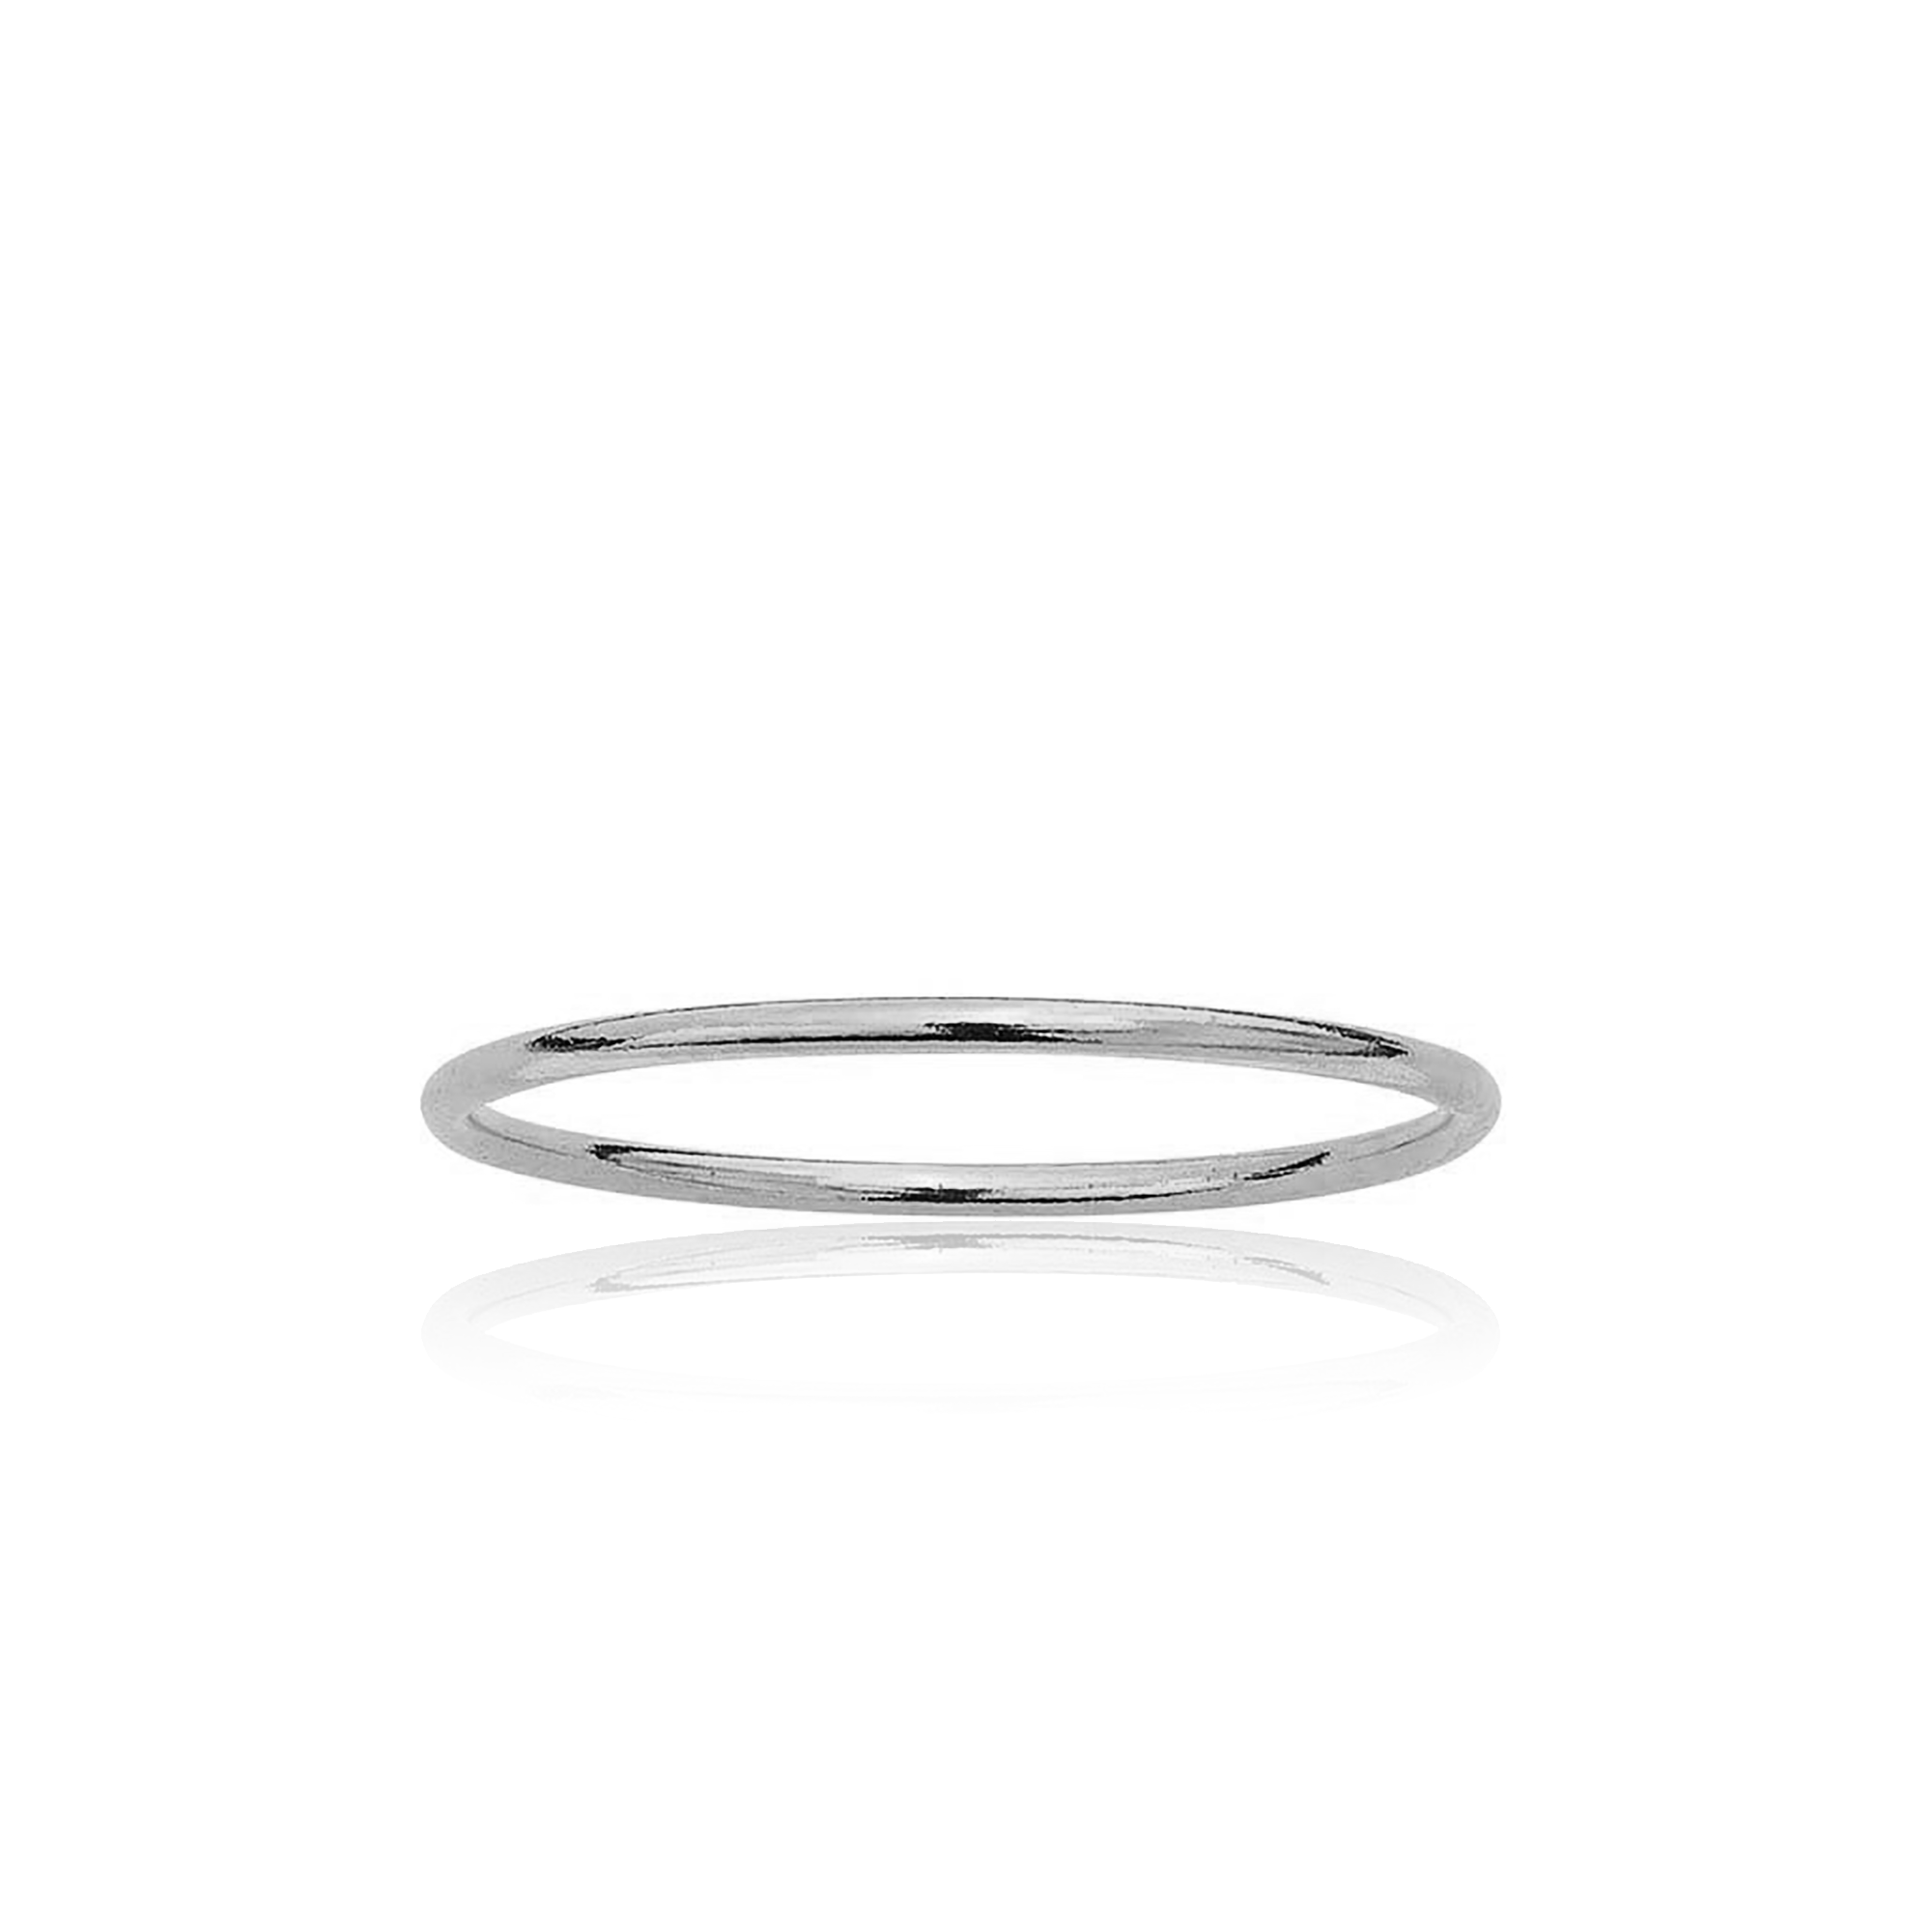 The Tube Stacking Ring